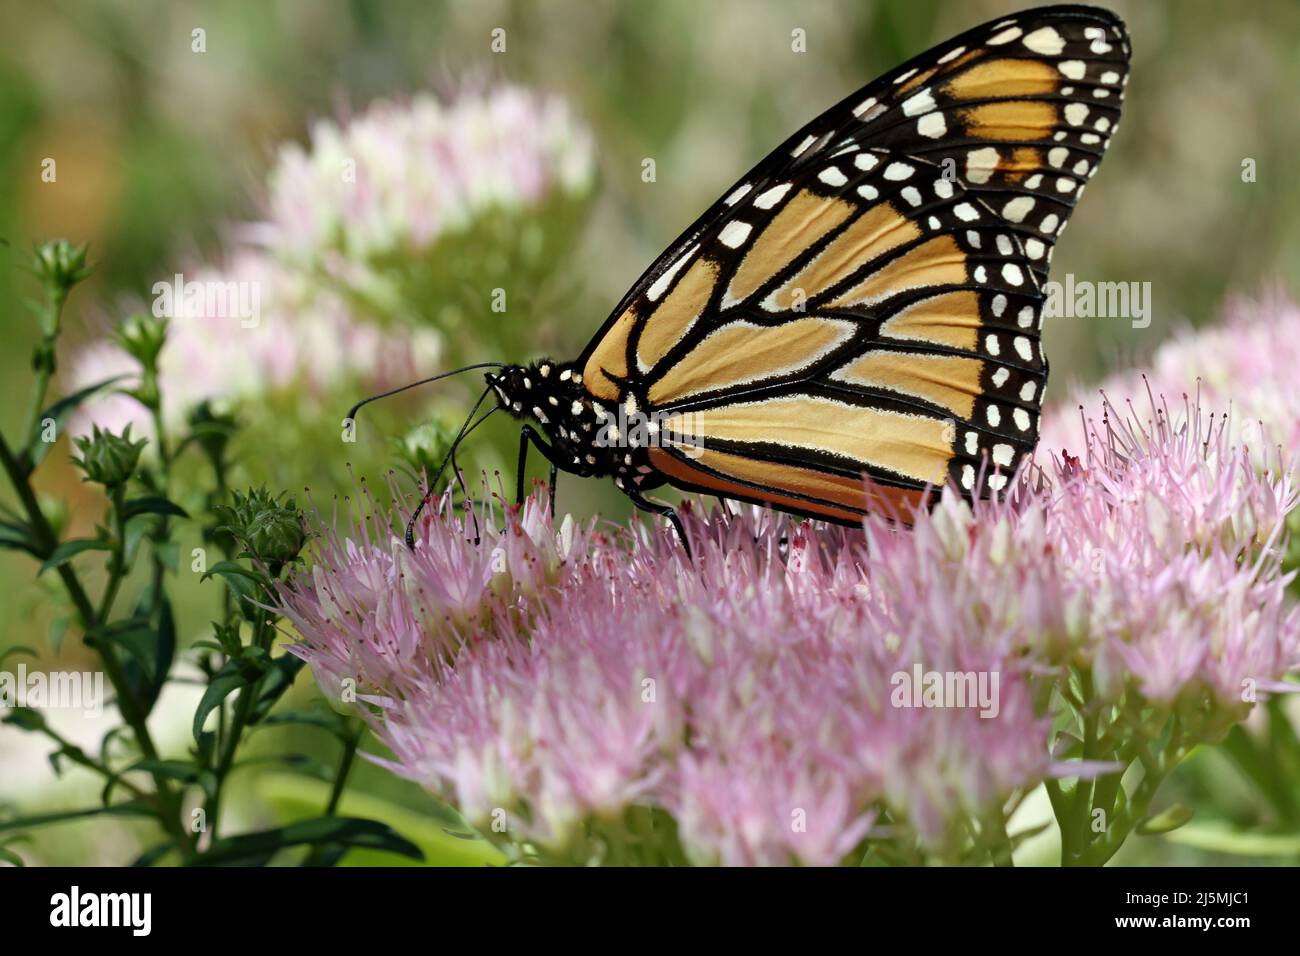 A close-up of a Monarch butterfly (Danaus plexippus), also known as the milkweed butterfly, feeding on a pink sedum plant in a New England garden Stock Photo